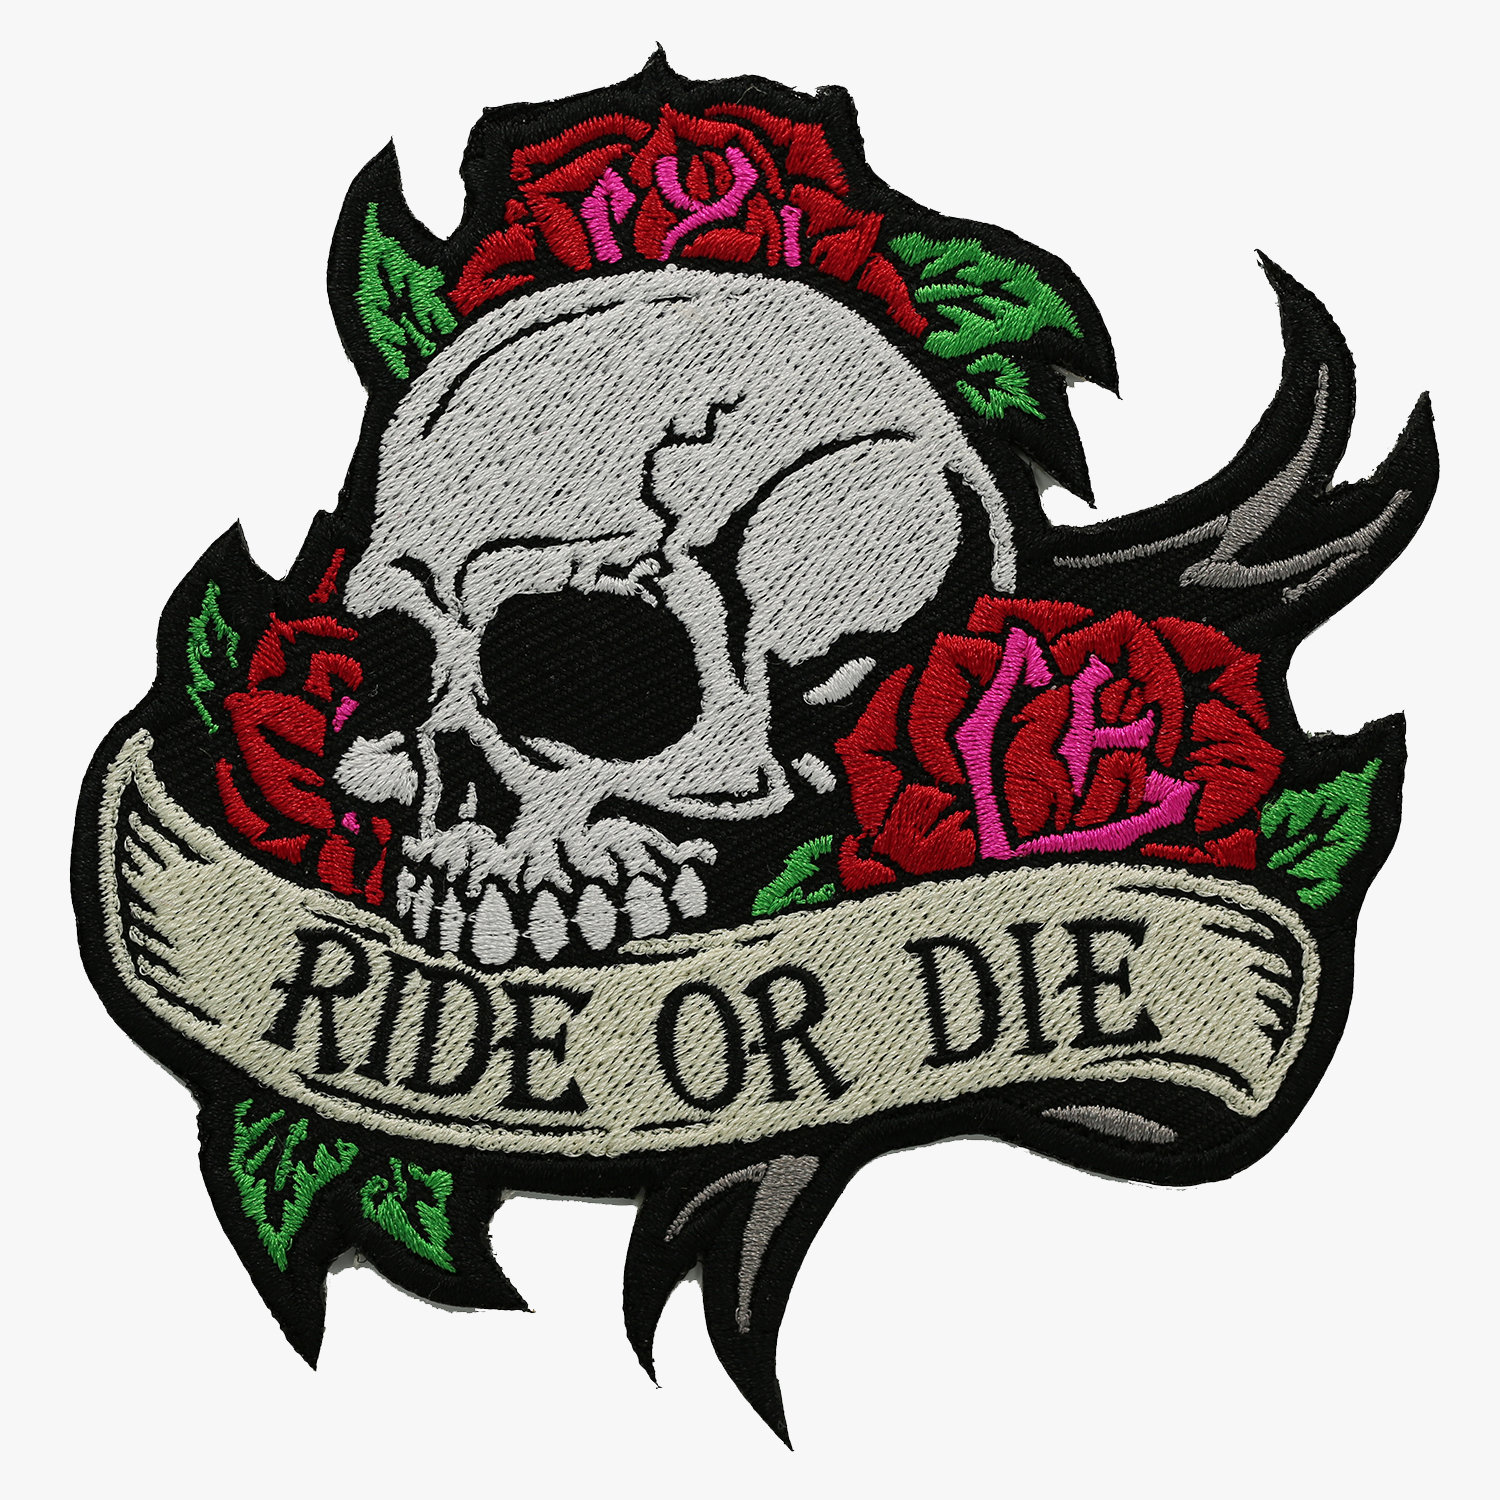 3 Jesus is lord Iron On Patches Funny Fun Slogan Hot Rod Drag race Tattoo  MC Biker Vest Motorcycle chest transfer hook loop